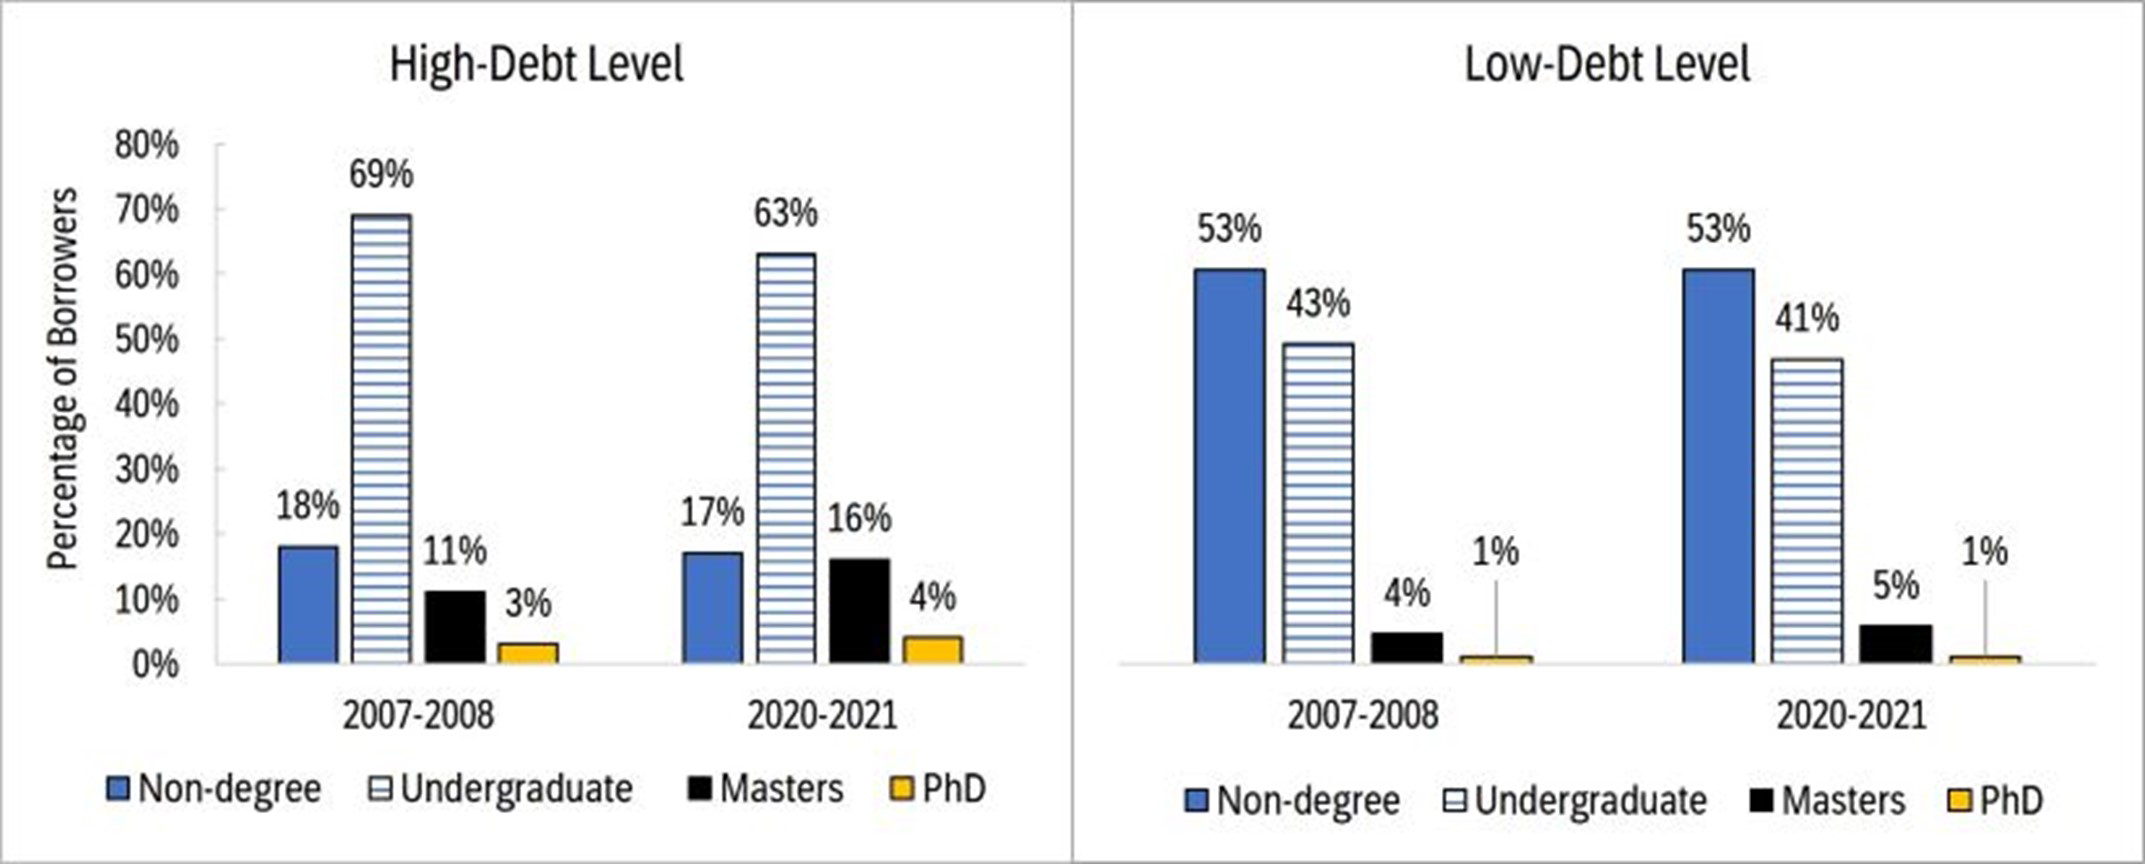 Figure 6: Distribution of borrowers by level of study and debt level, cohort 2007-2008 vs. 2020-2021 - Text description follows